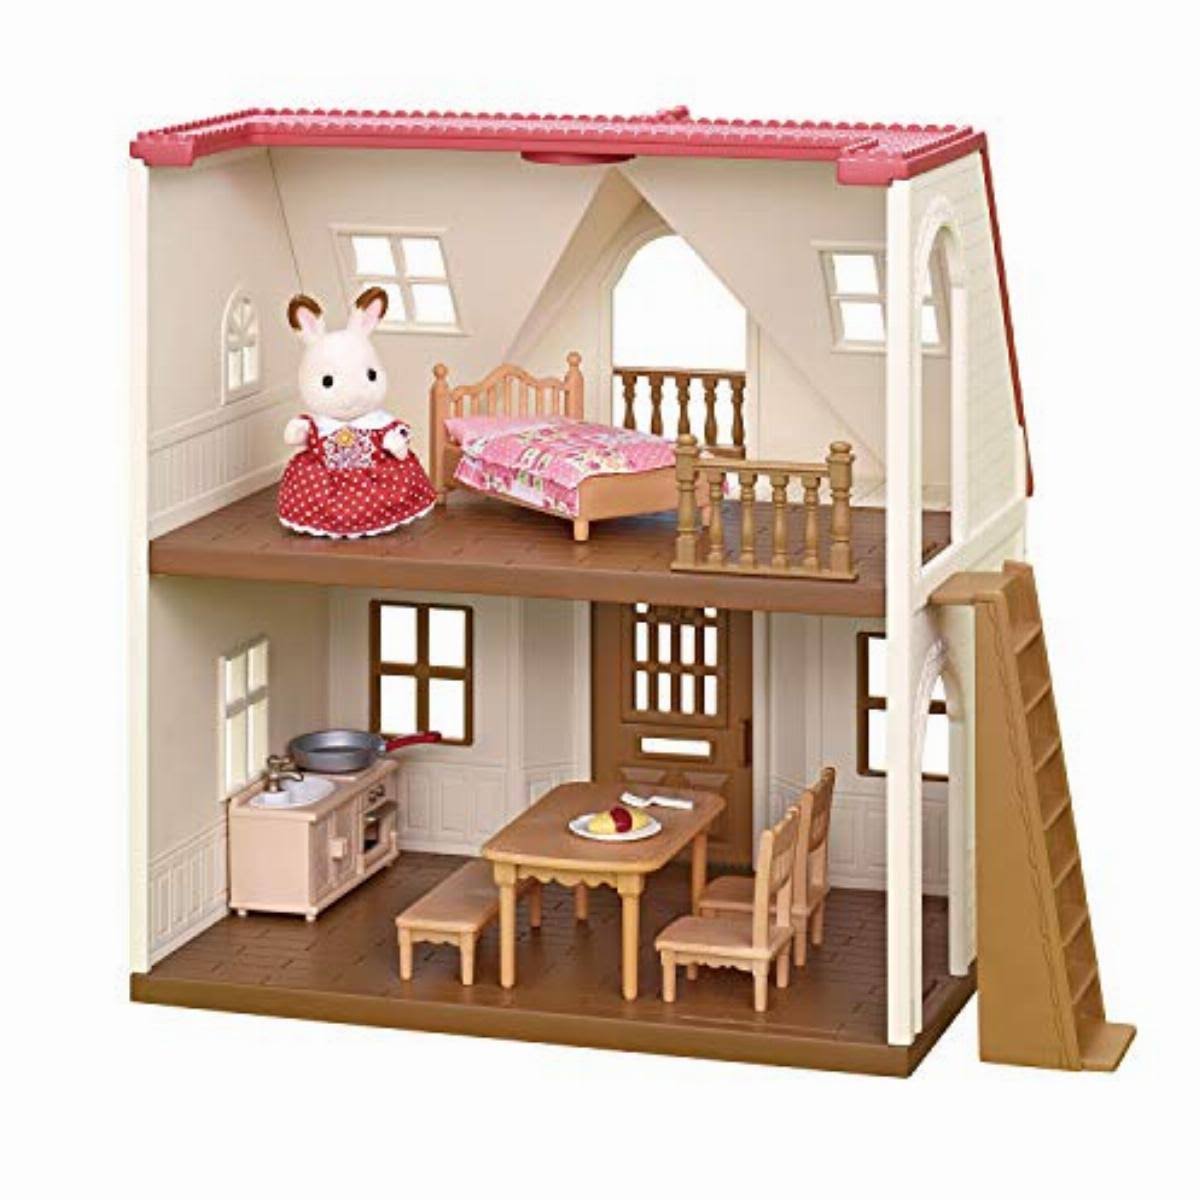 Calico Critters CC1798 Red Roof Cozy Cottage Starter Home Dollhouse Miniatures